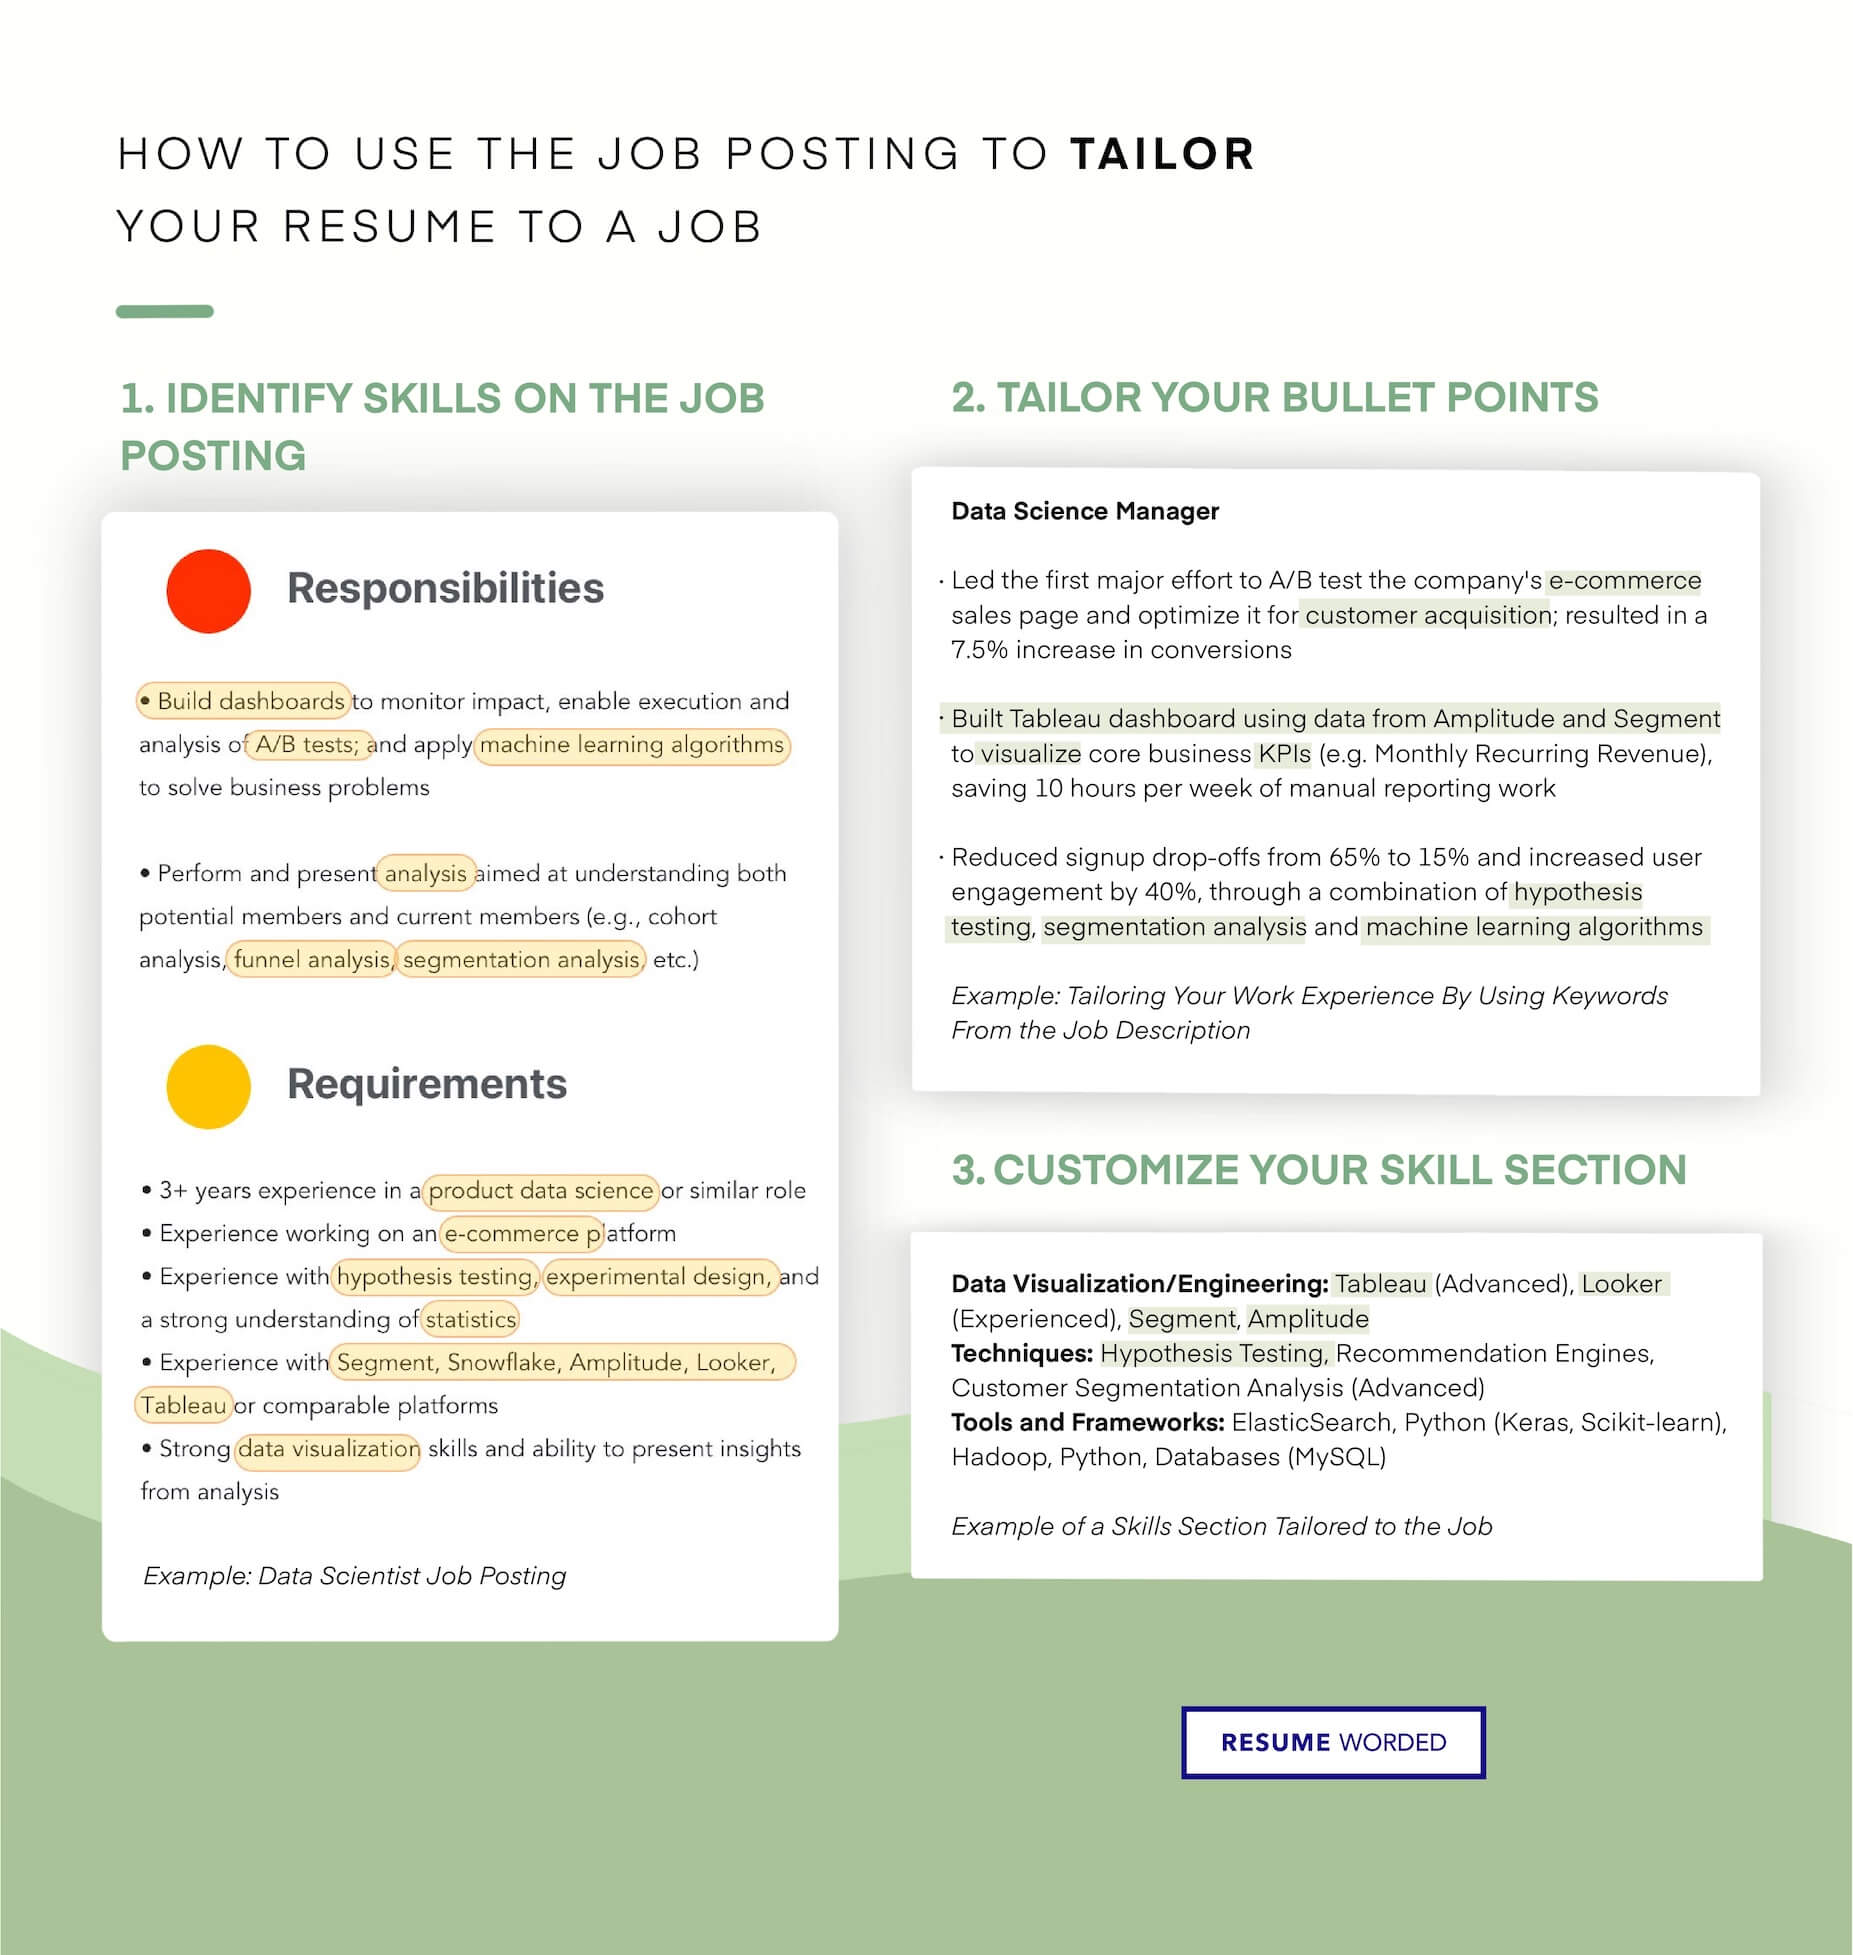 Tailor your resume to cloud solution topics. - Cloud Solutions Architect Resume